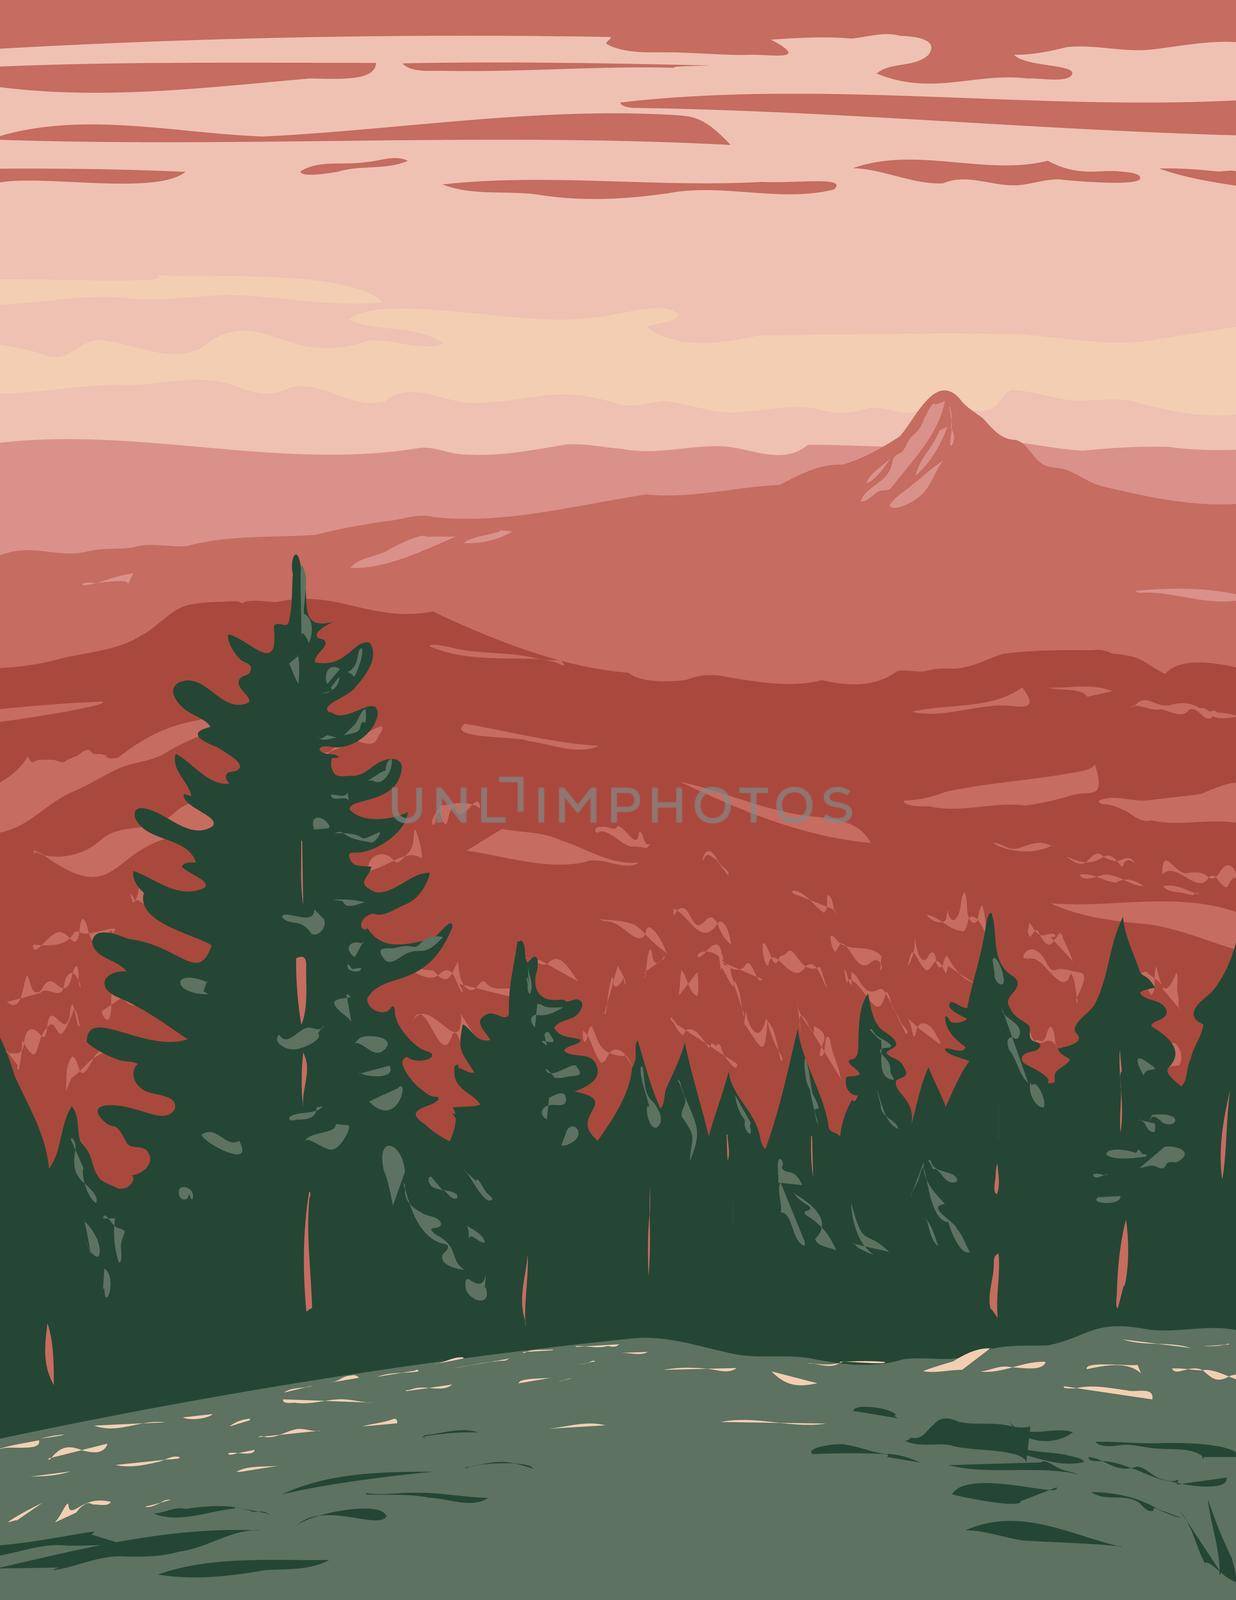 WPA poster art of Siskiyou Mountains located in Cascade-Siskiyou National Monument in Southwestern Oregon USA done in works project administration style or federal art project style.